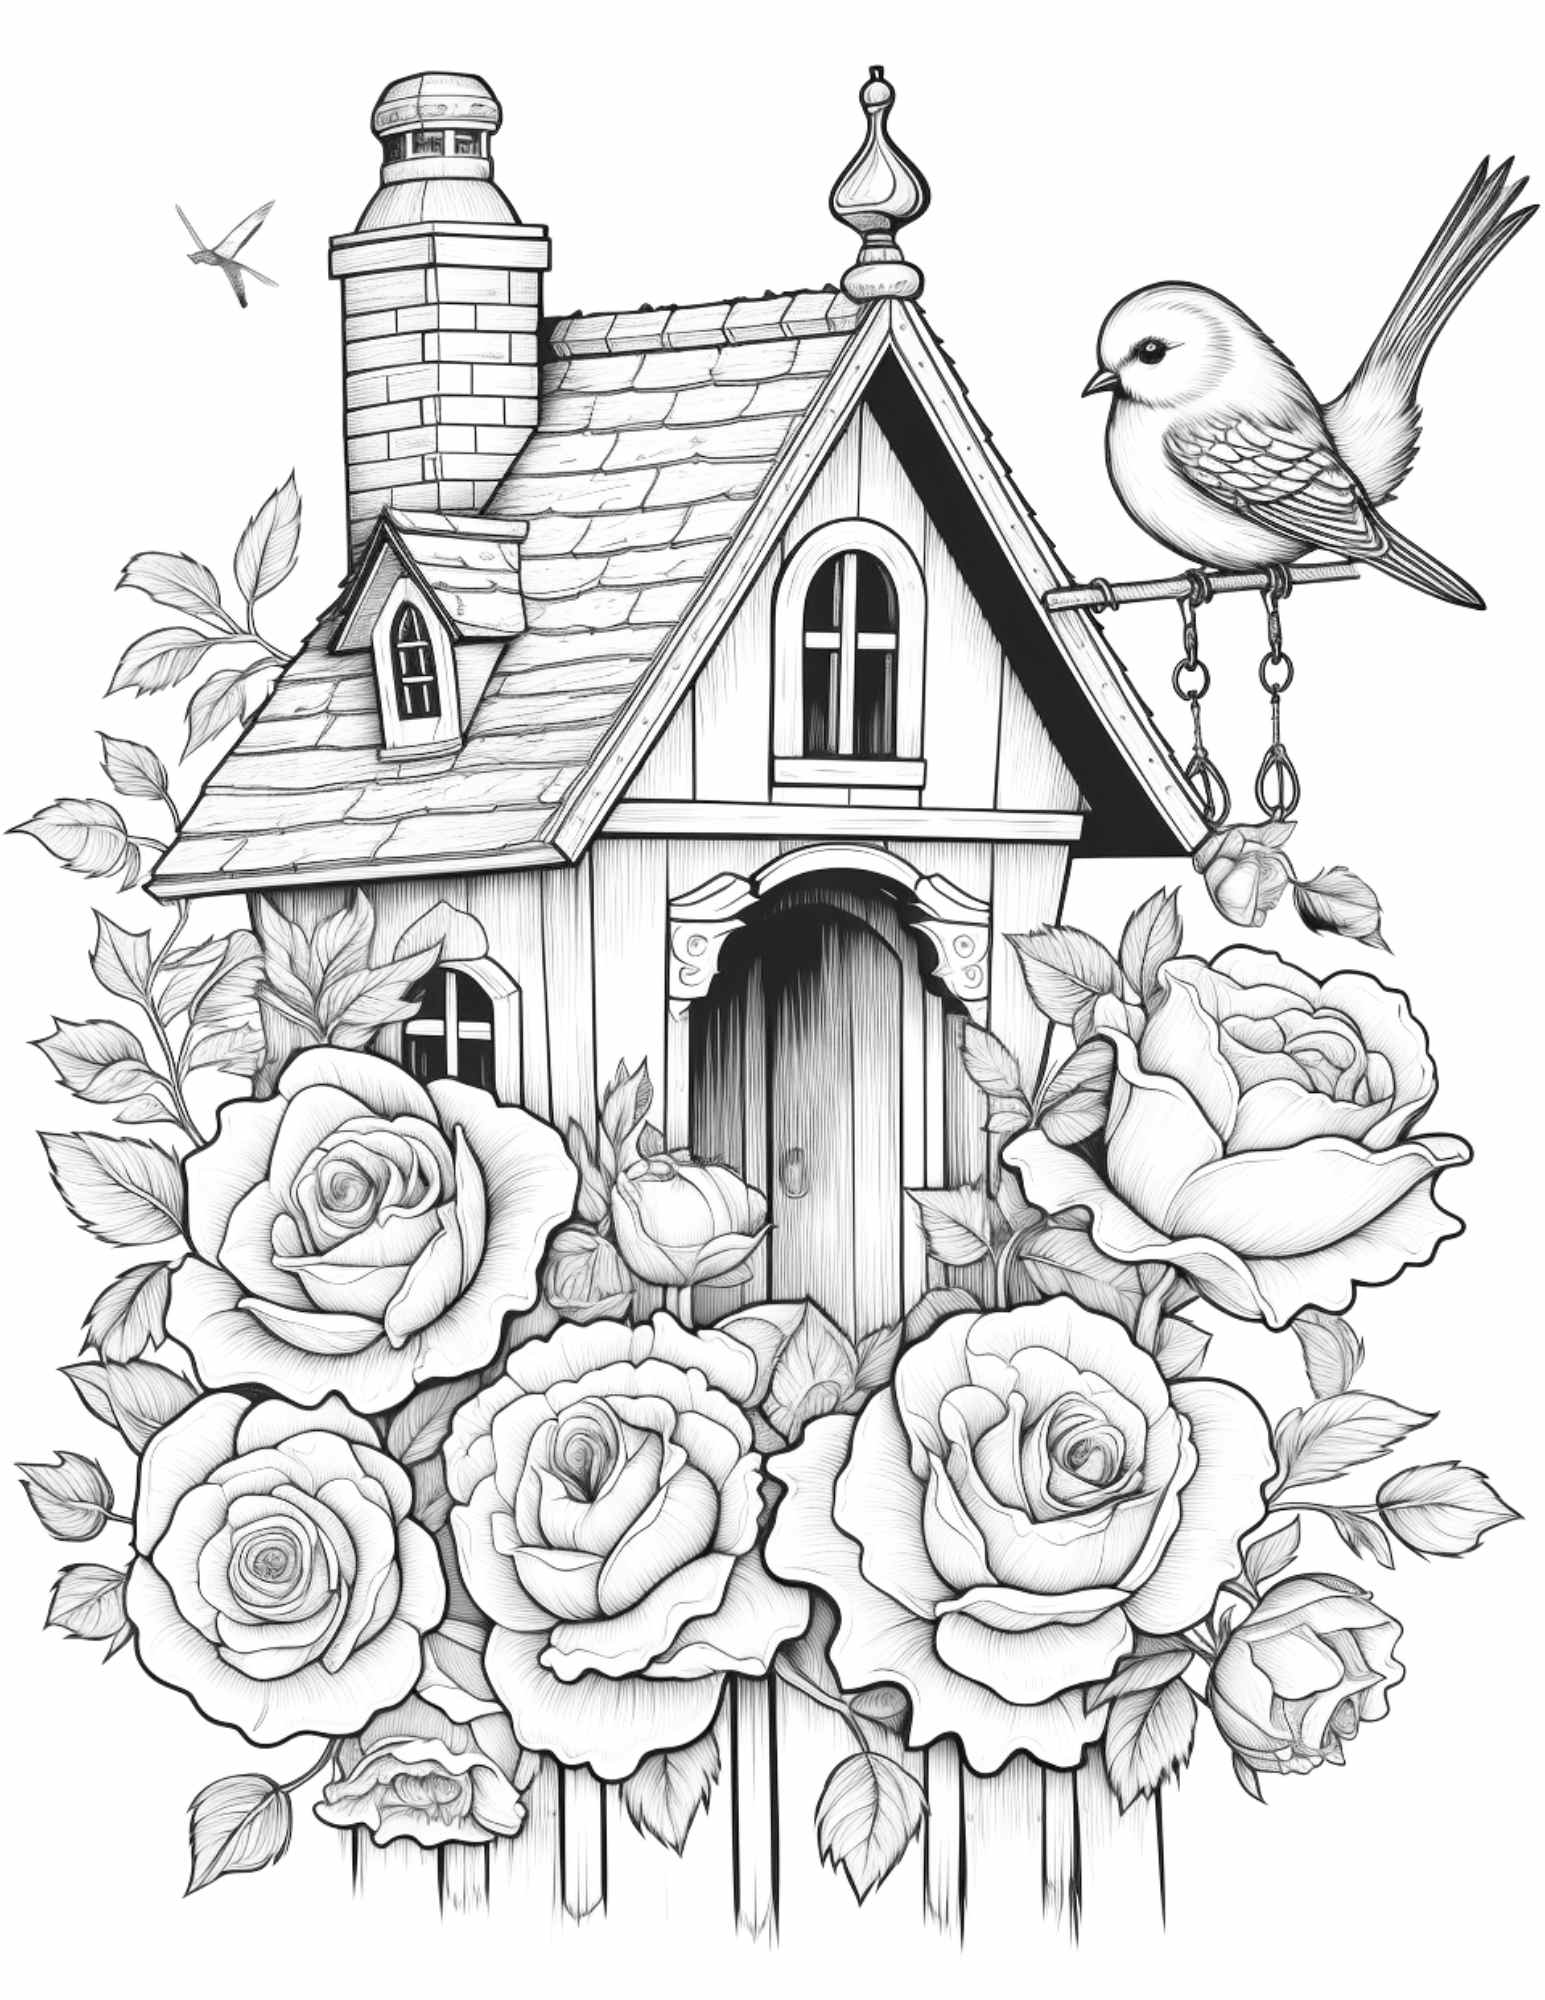 Floral birdhouse coloring page, grayscale coloring sheet for adults, printable nature coloring page, birdhouse art for coloring, free flower birdhouse coloring page